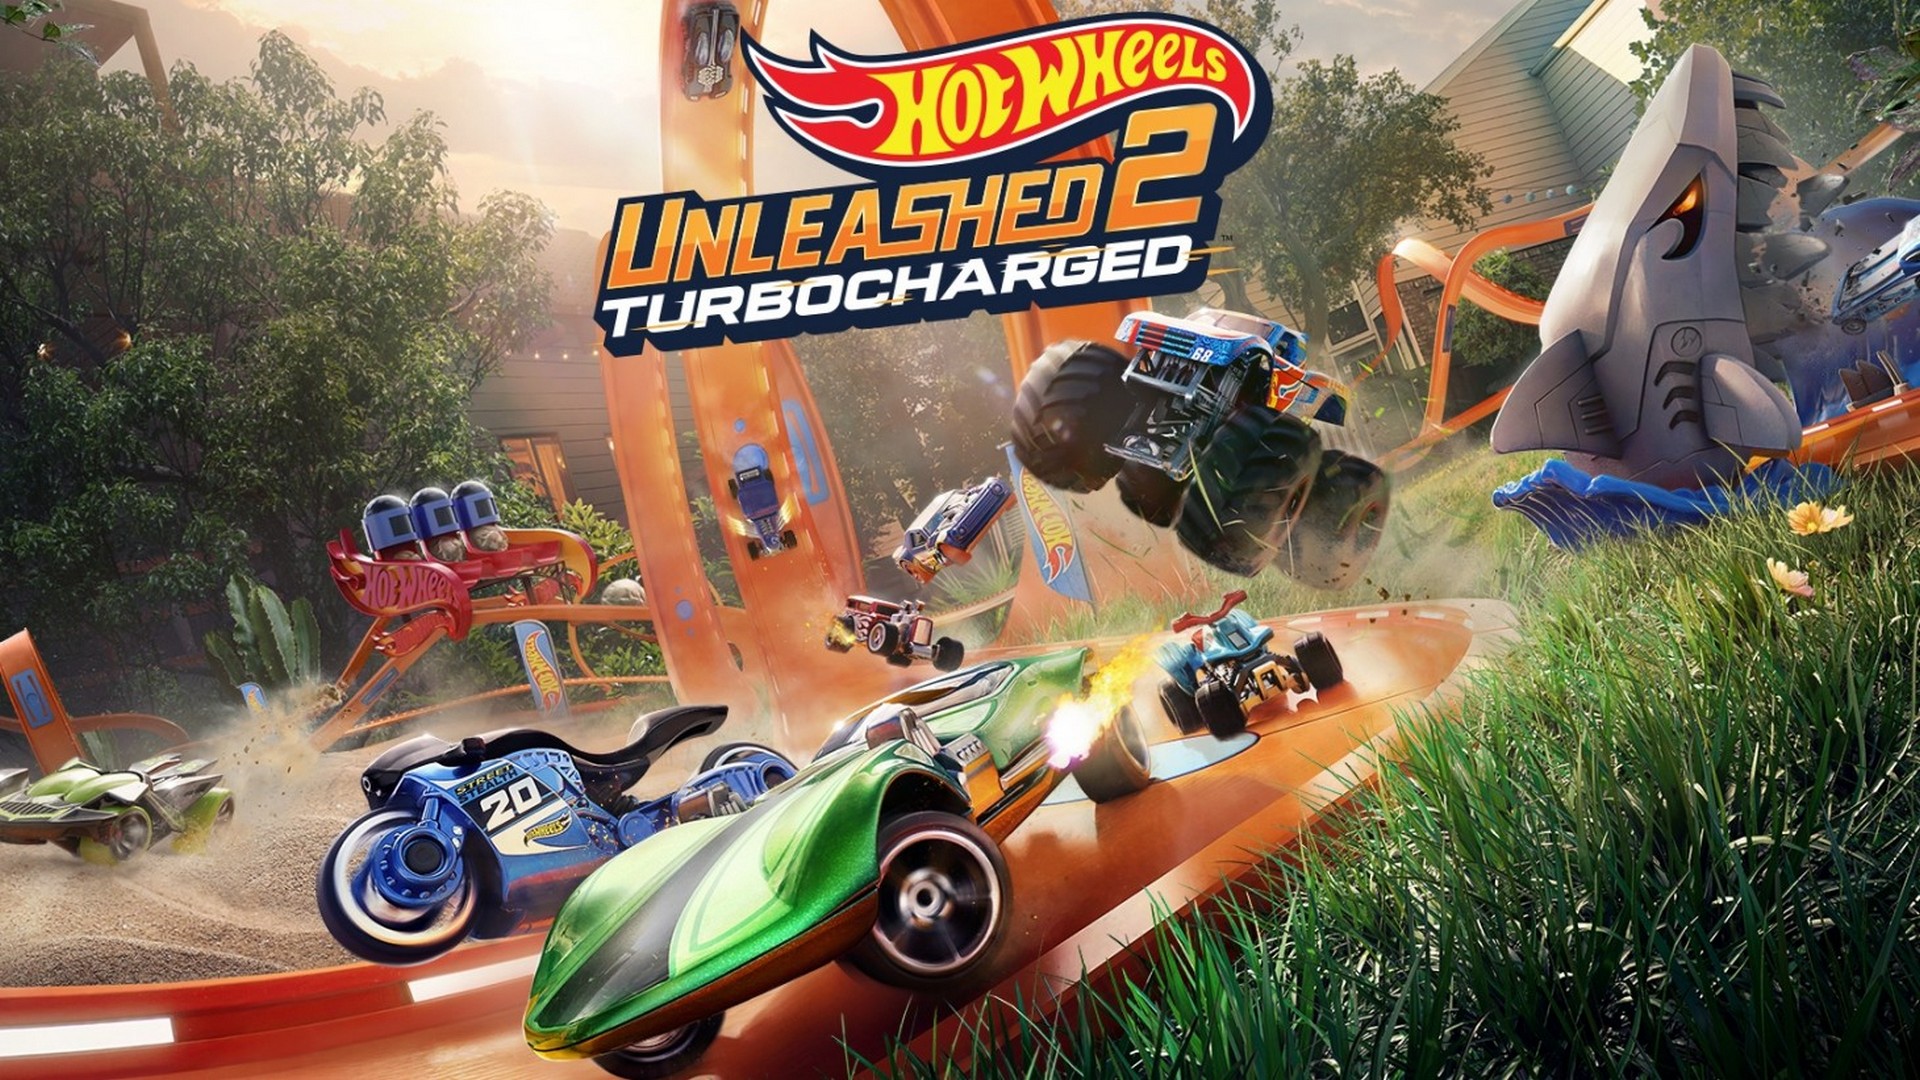 New Game Modes & Single-Player Campaign Presented In The Latest Hot Wheels Unleashed 2 – Turbocharged Trailer